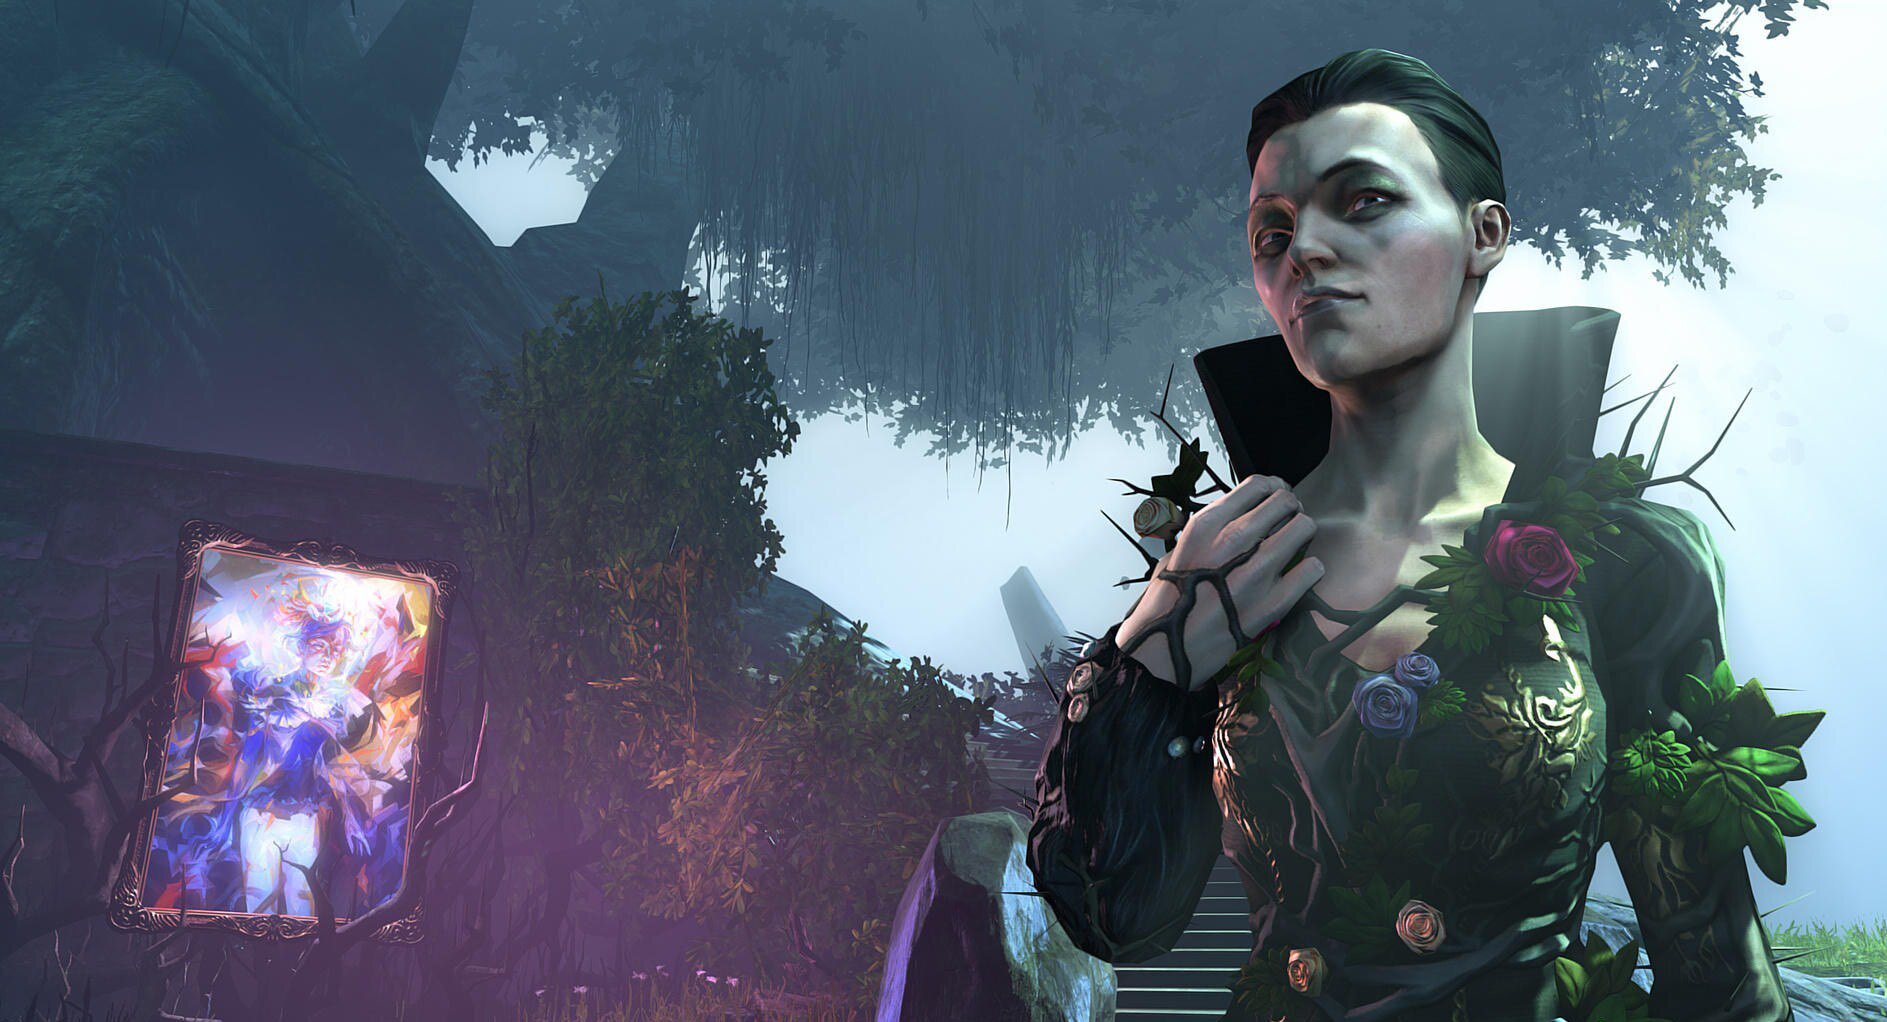 Dishonored, "The Brigmore Witches", New DLC Pictures